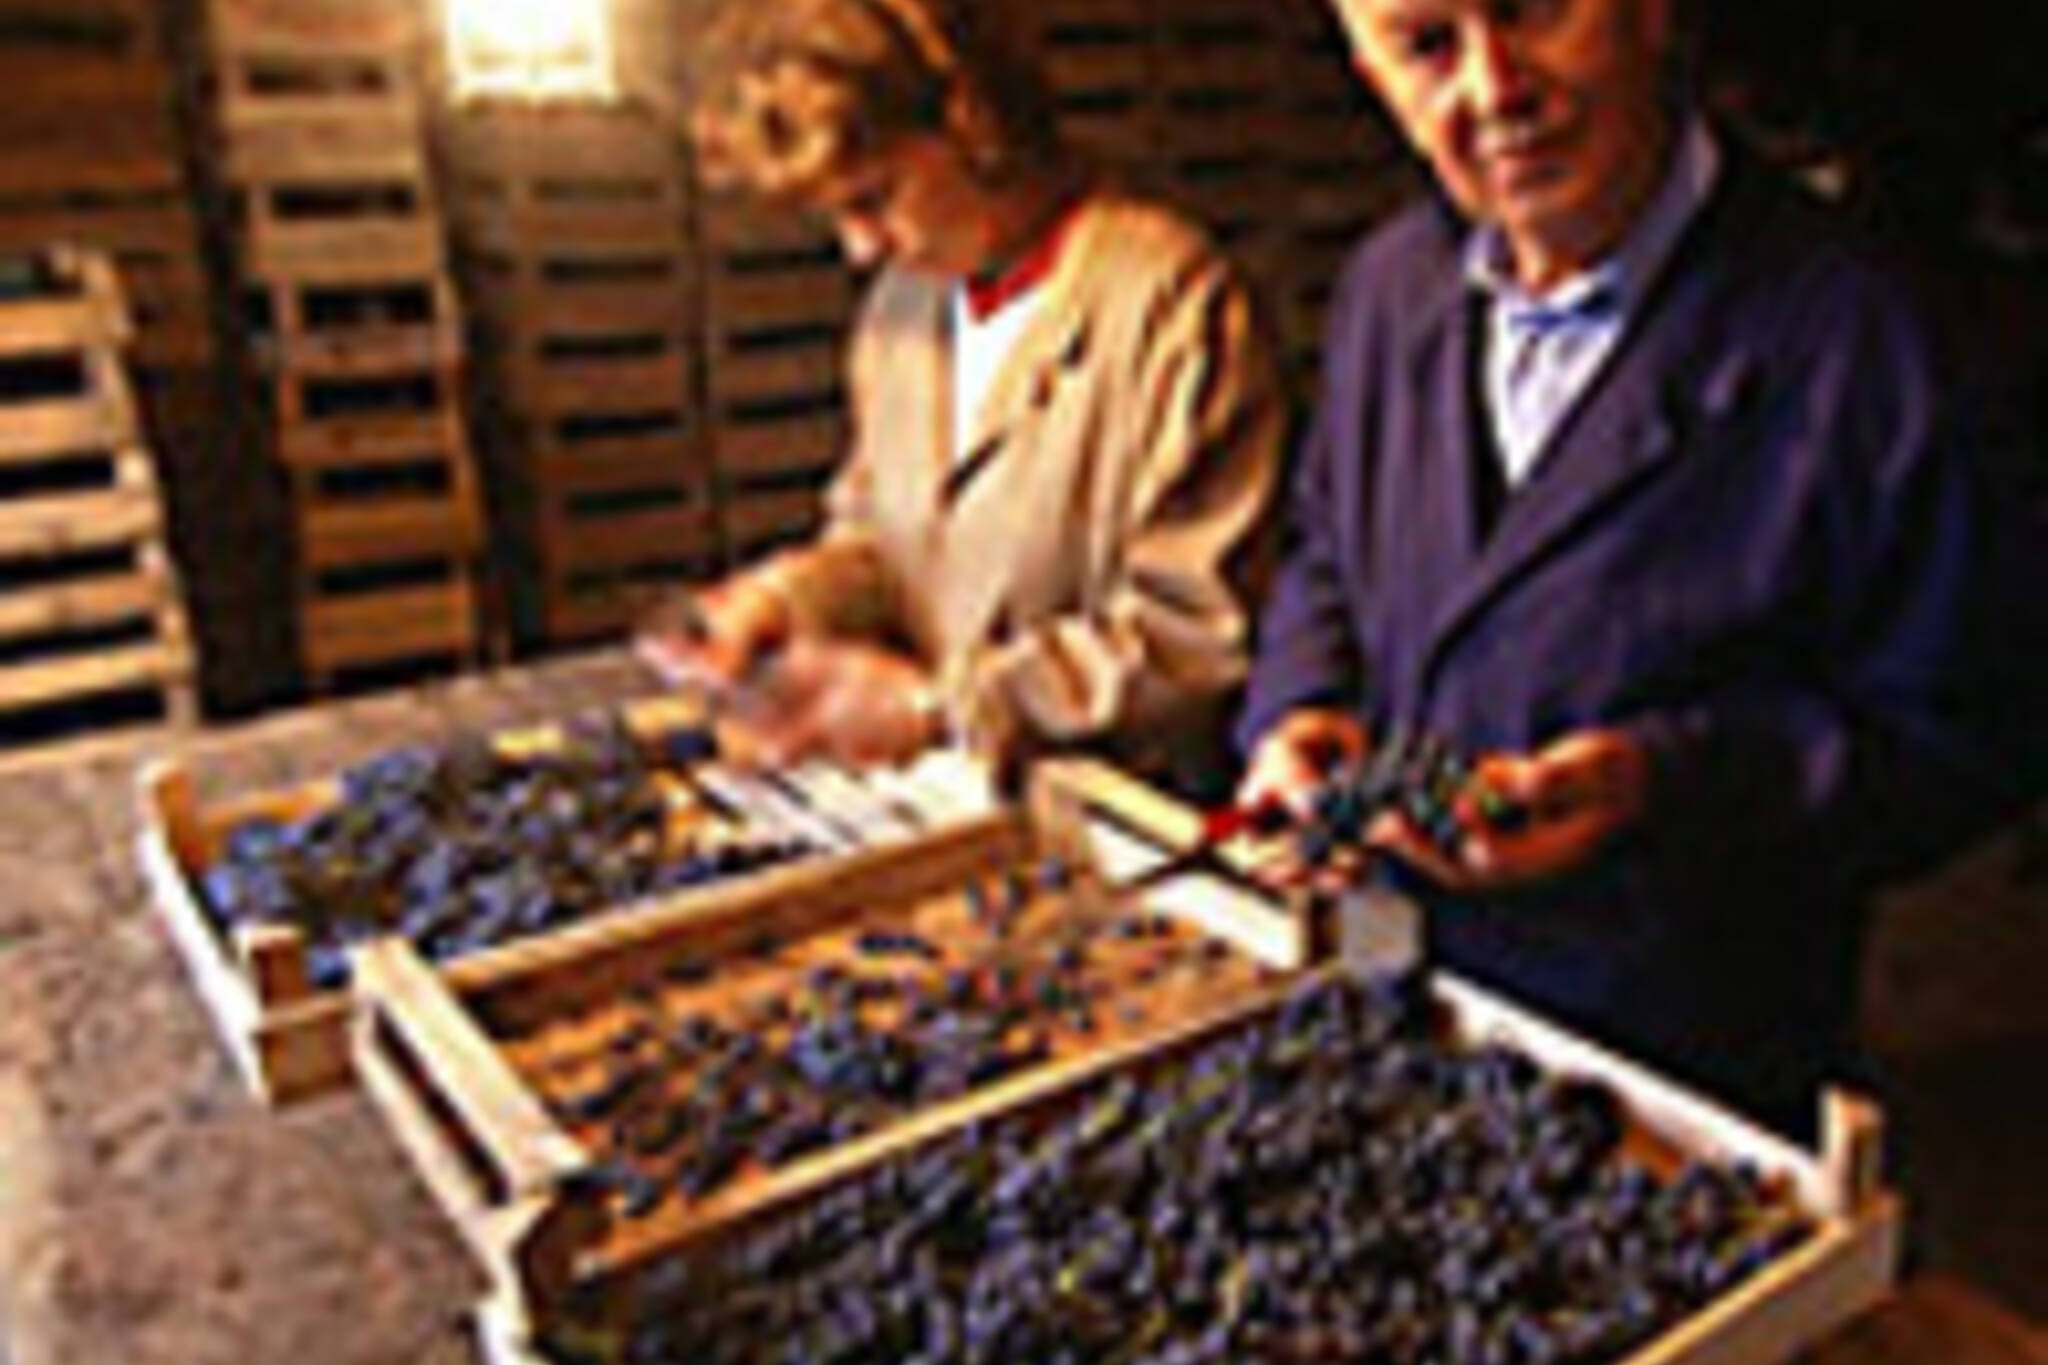 Guiseppe Quintarelli(右)使他的魔术。(Image from www.winephotos.com)